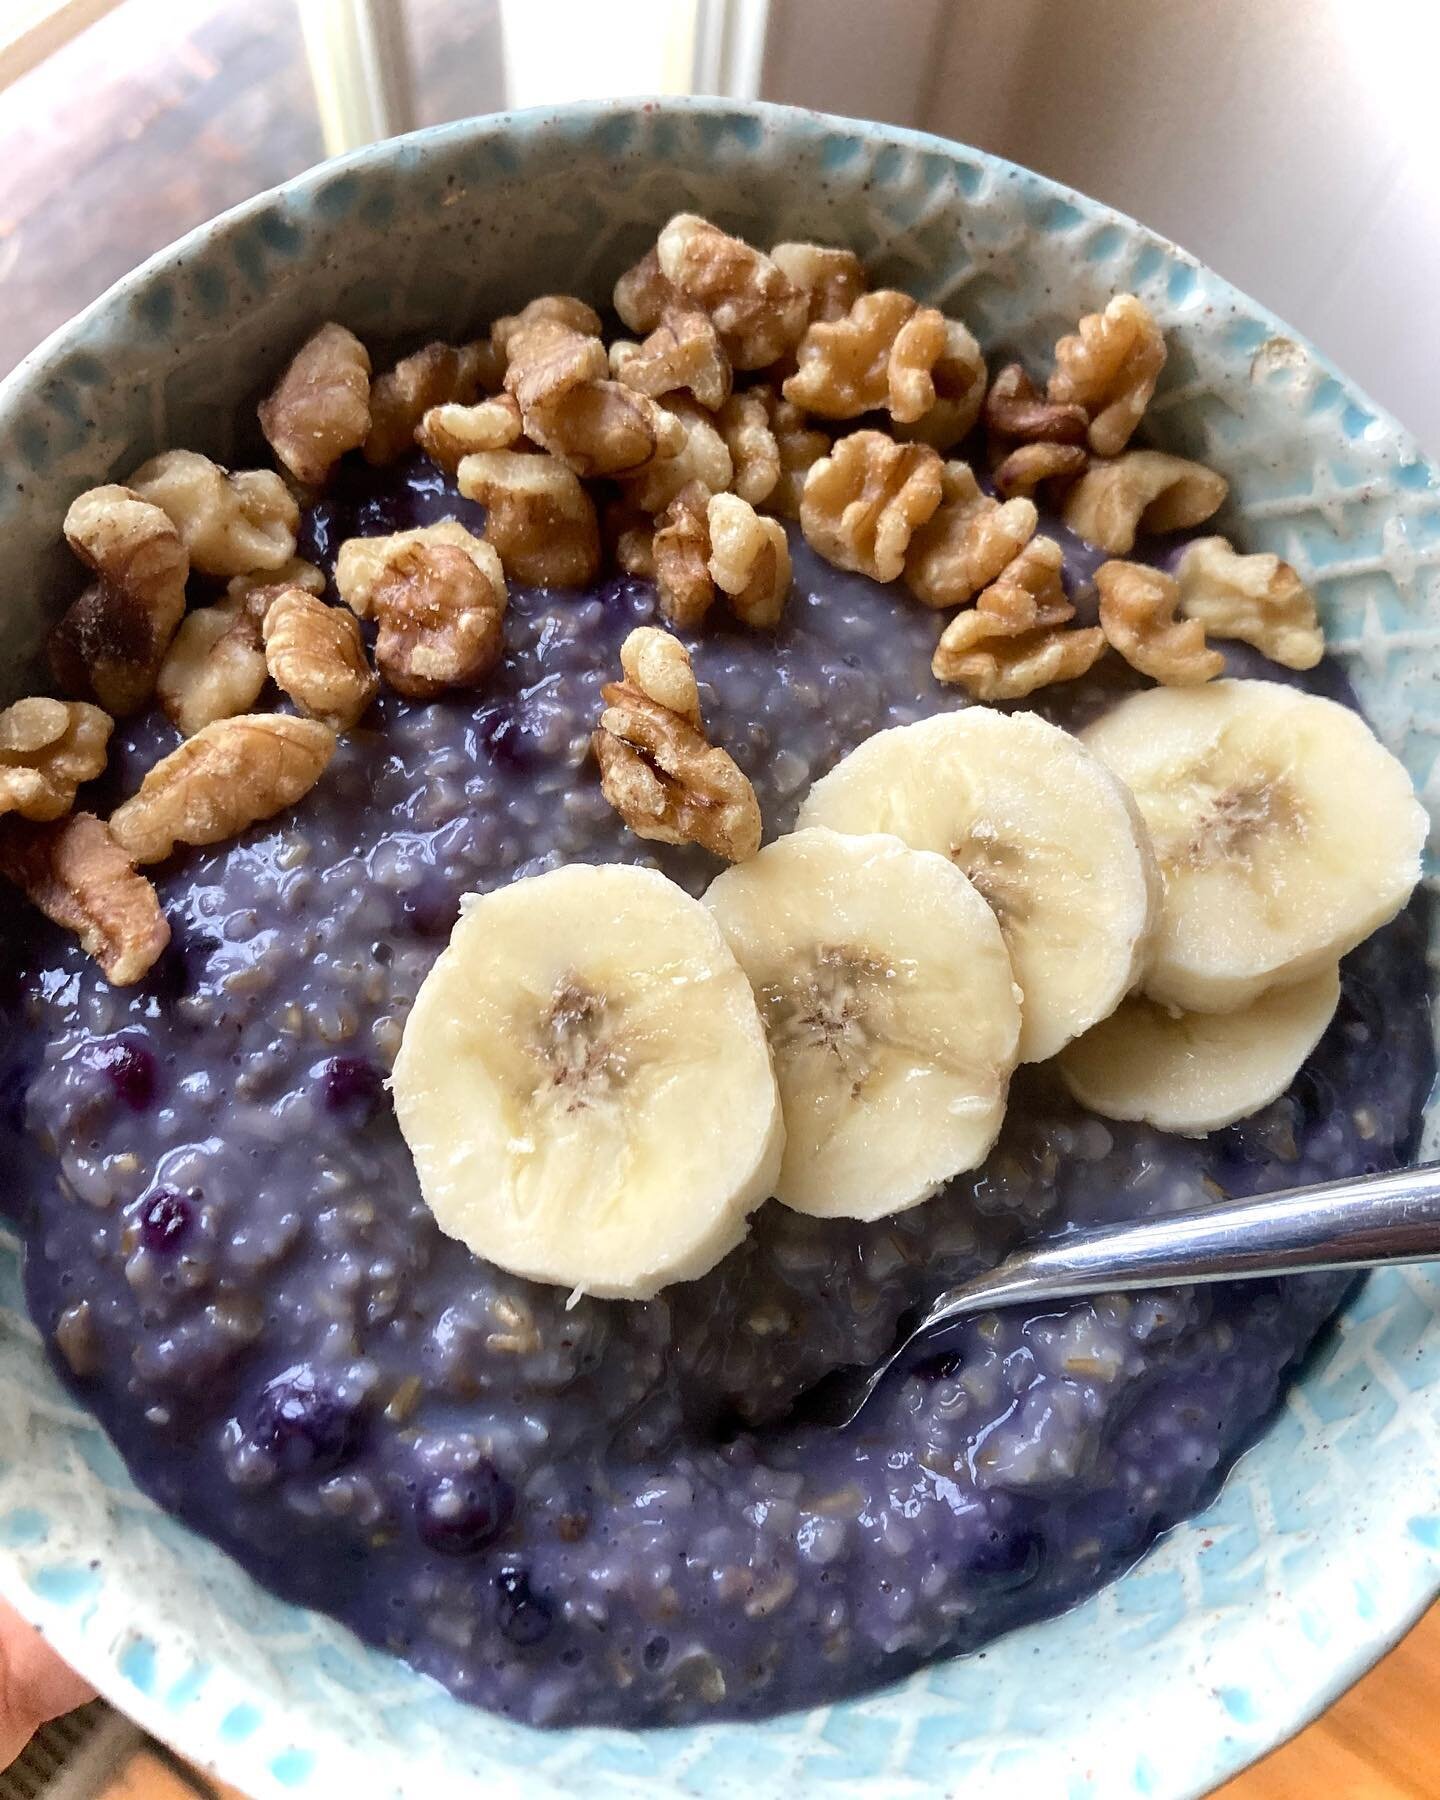 No such thing as too many blueberries  in oatmeal!🫐😜🫐 When berries are out of season, I stock the freezer with the frozen varieties and am a happy girl all winter long. 

Pro tip 👉🏽 if plain oatmeal never keeps you full, add more protein and fat